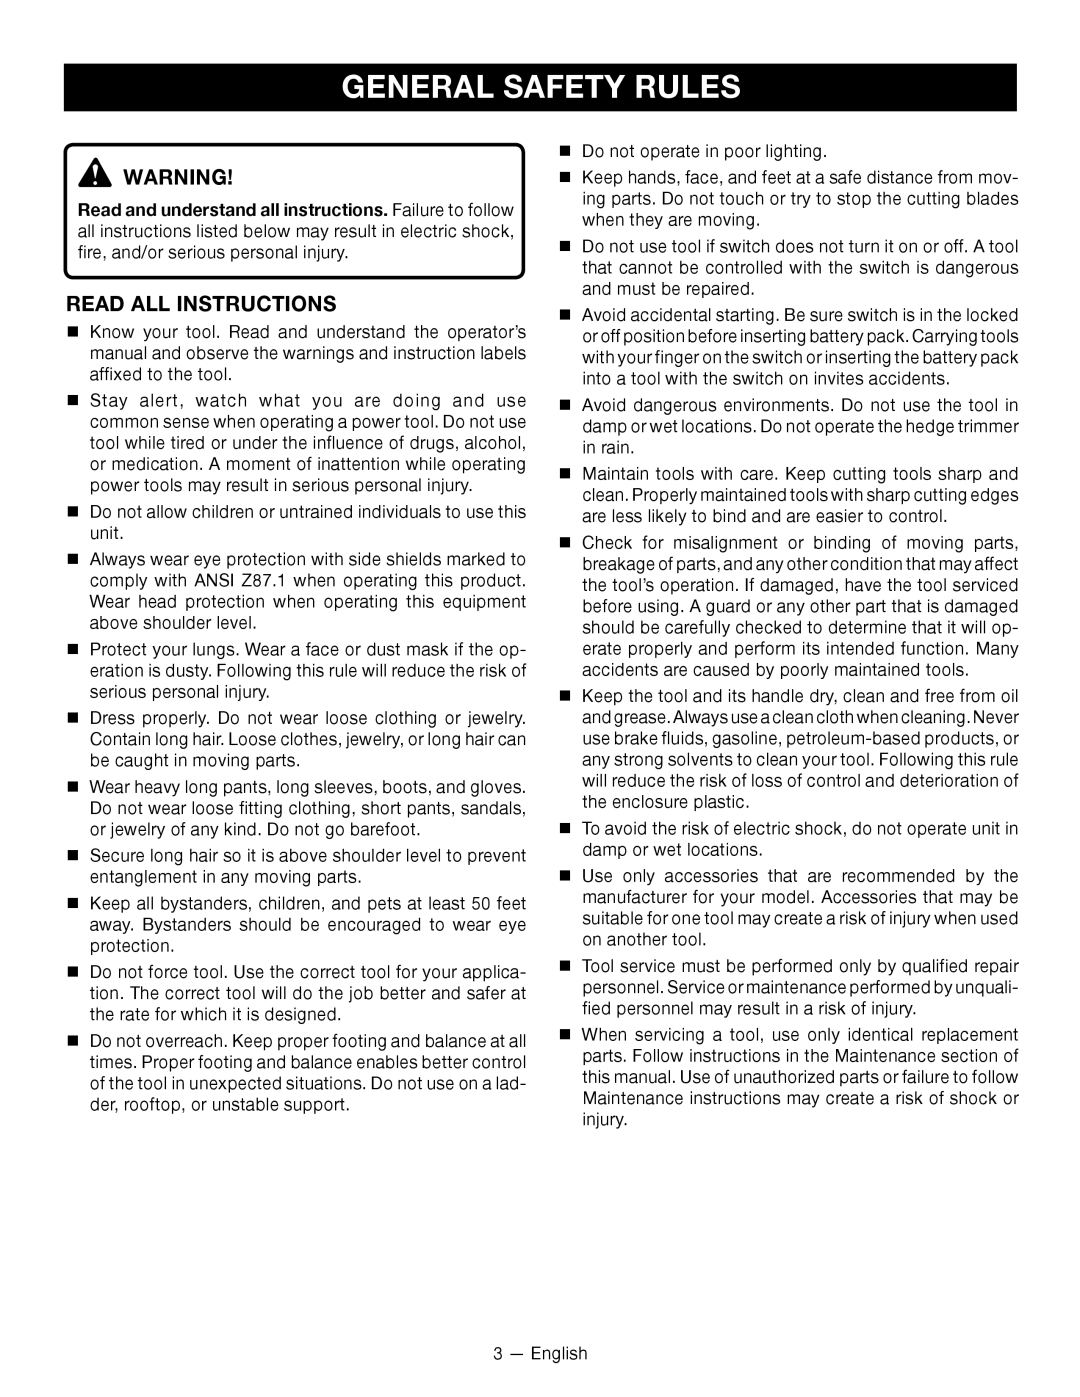 Ryobi RY24600 manuel dutilisation General Safety Rules, Read All Instructions 